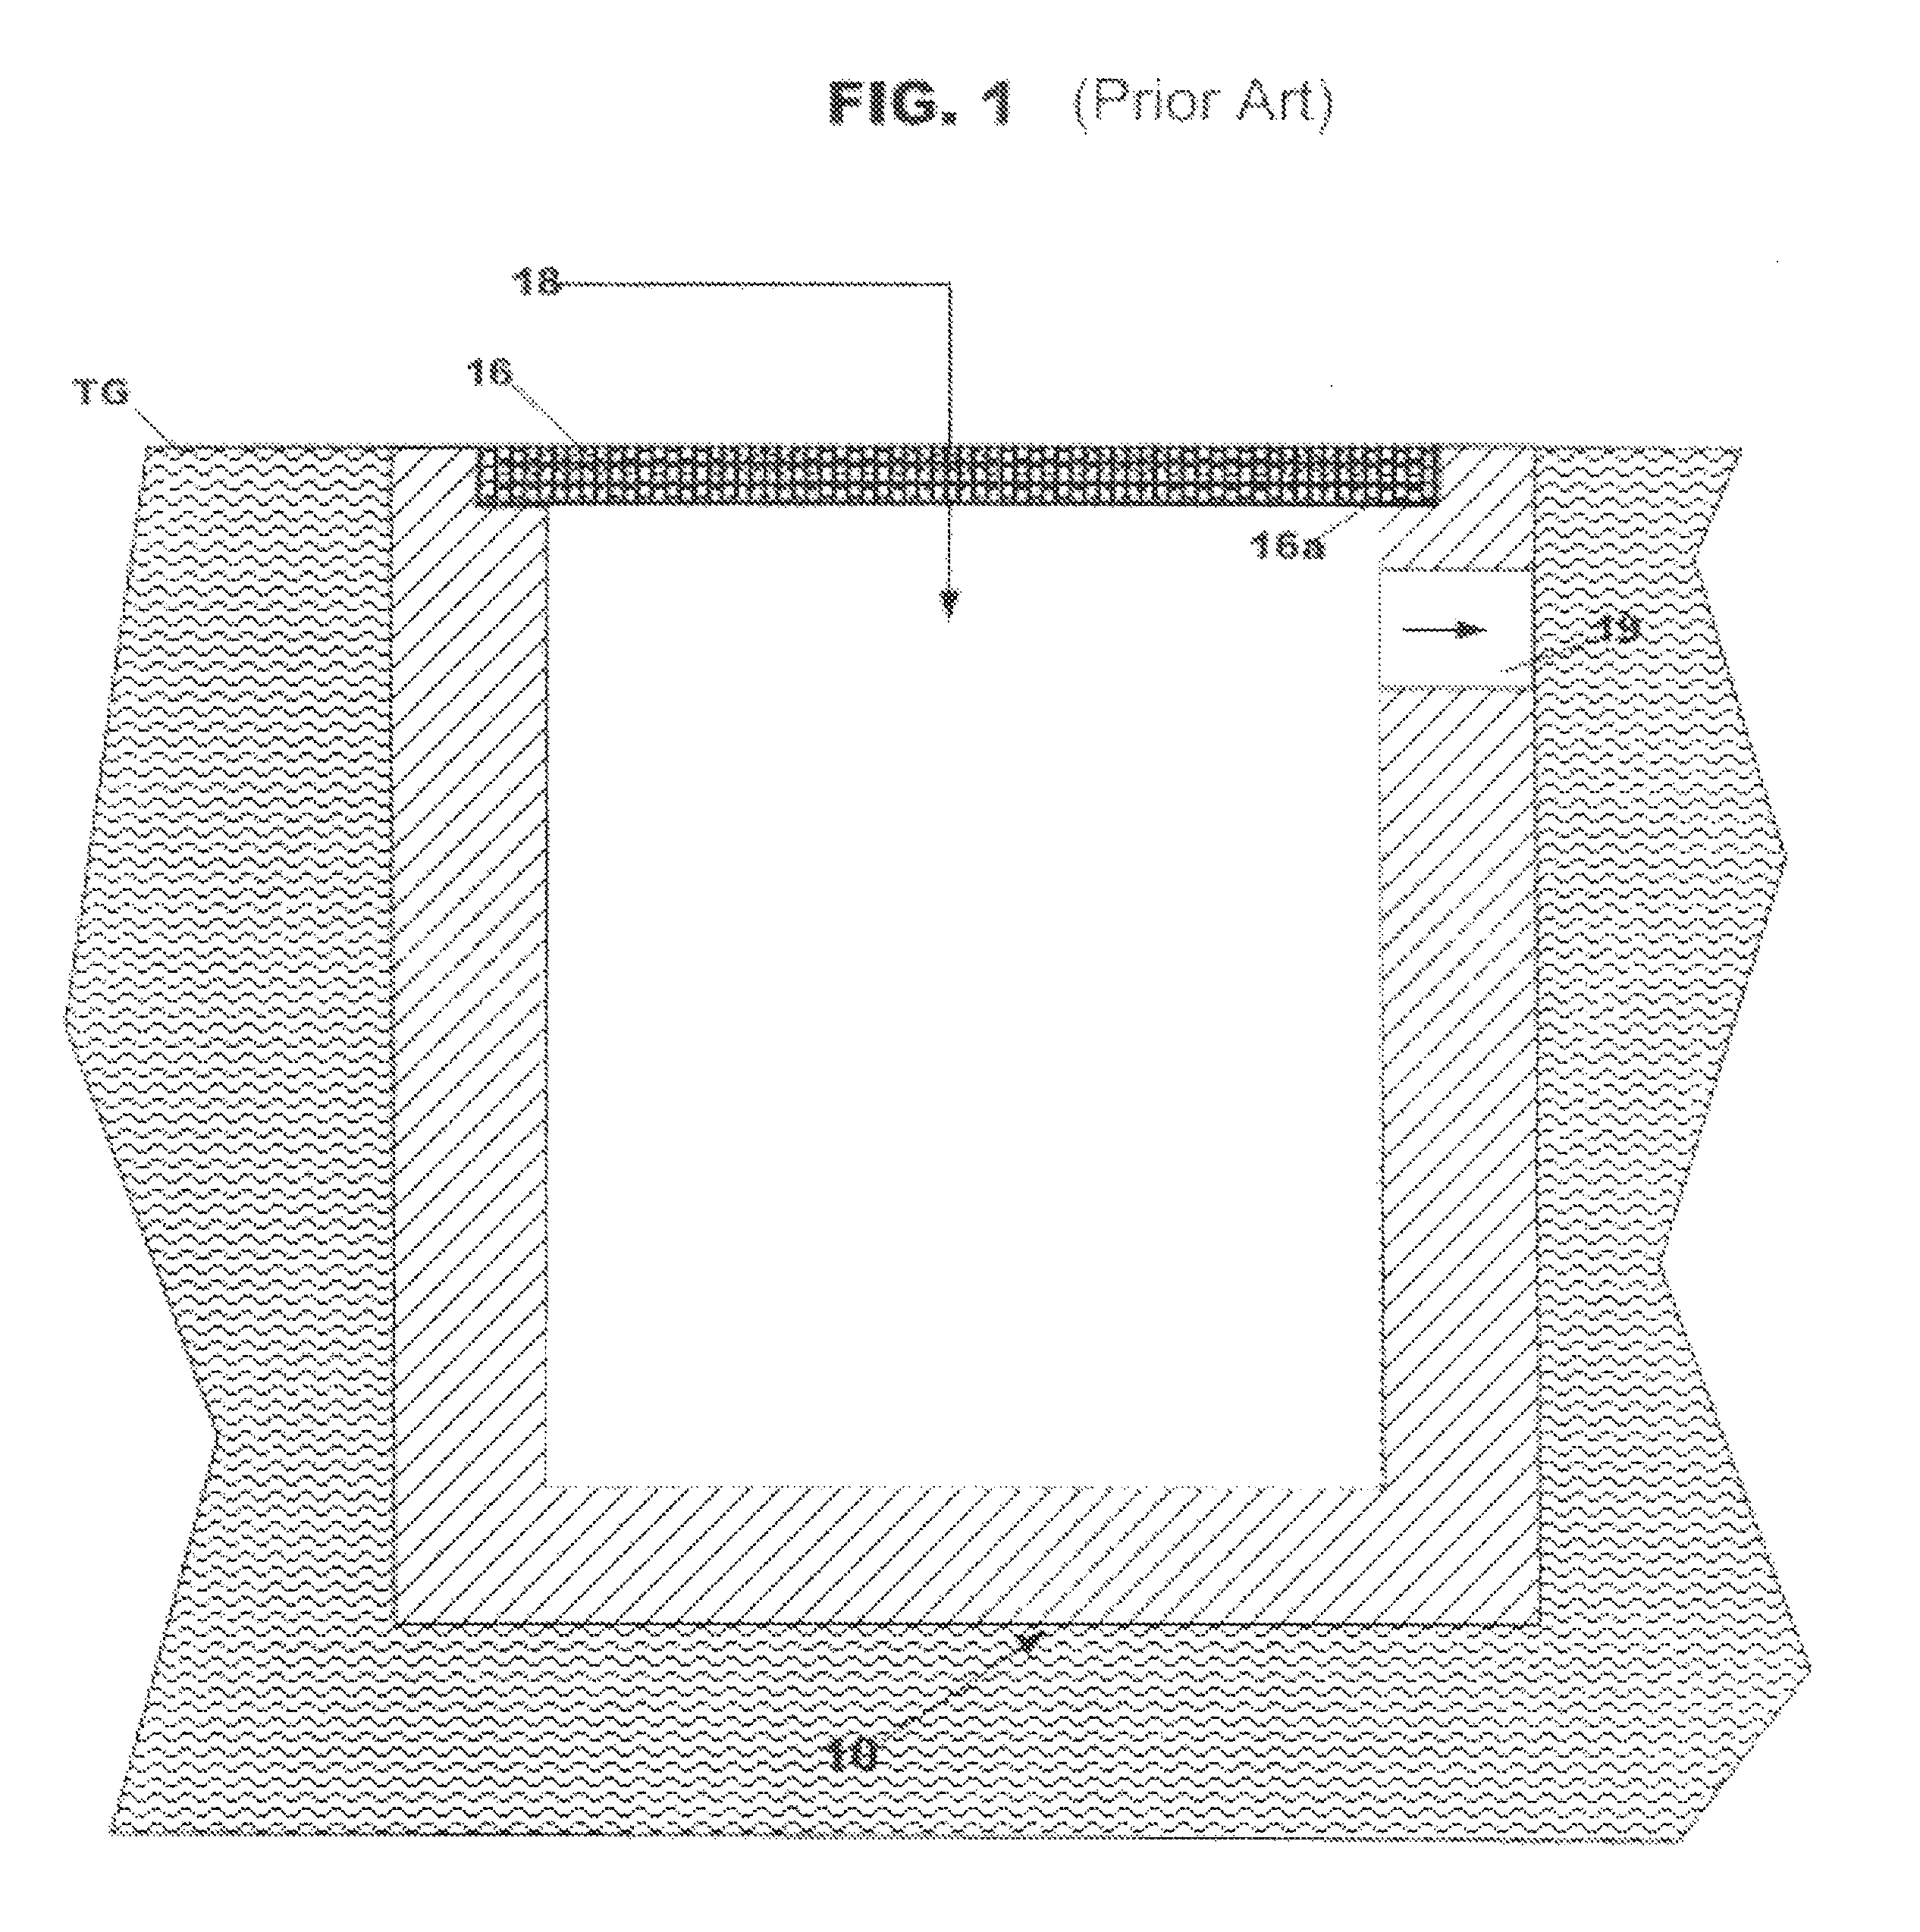 Drain inlet vault and method of assembly